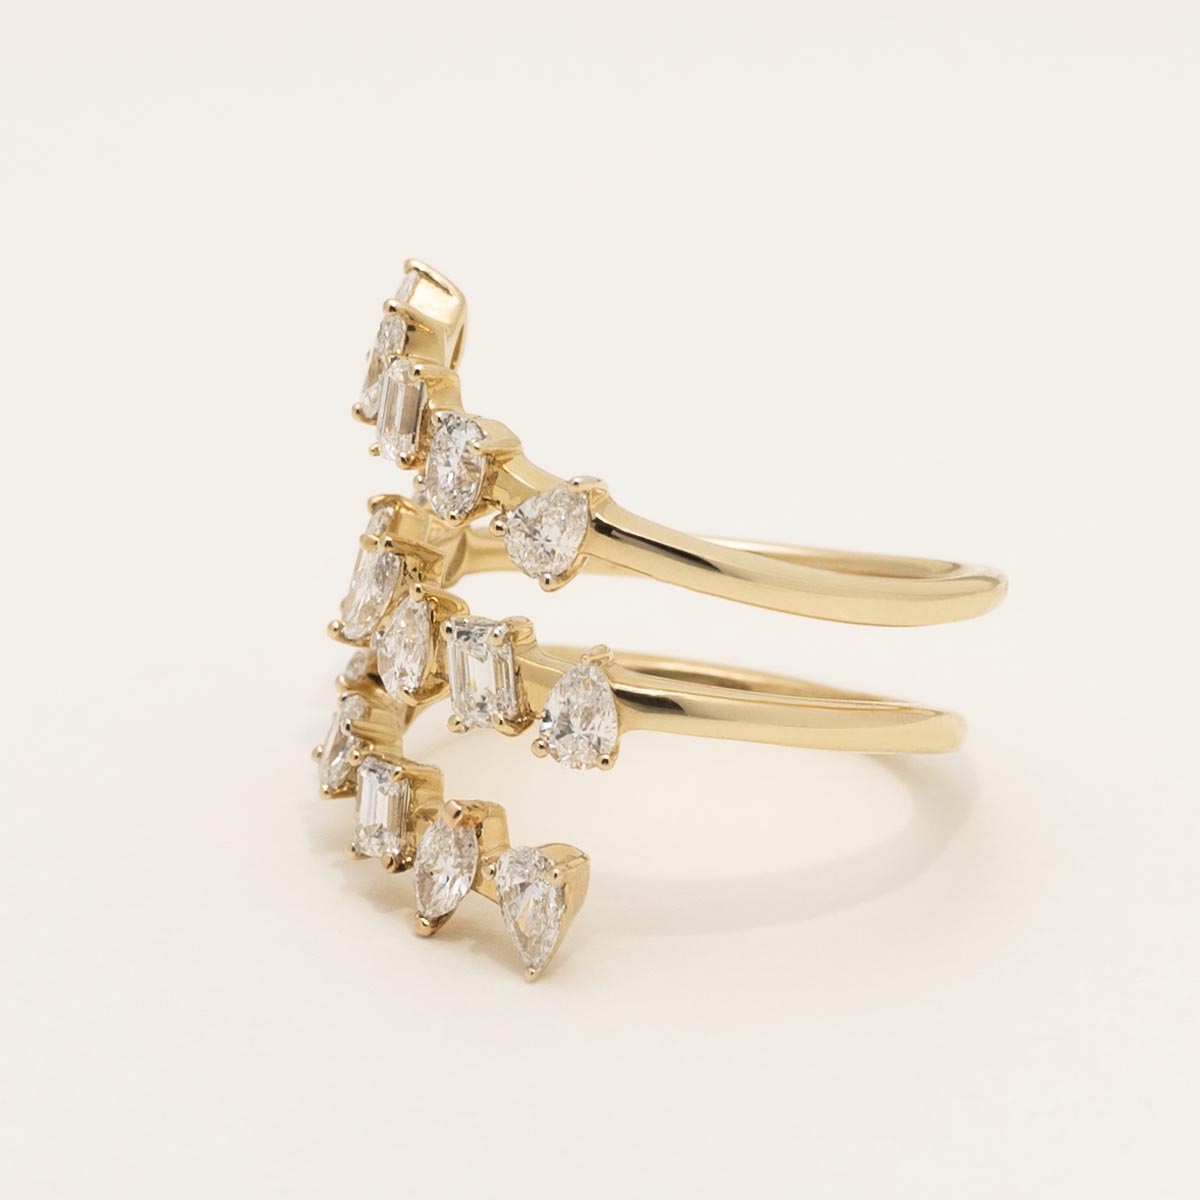 Multi Shaped Diamond Ring in 14kt Yellow Gold (1 1/2ct tw)